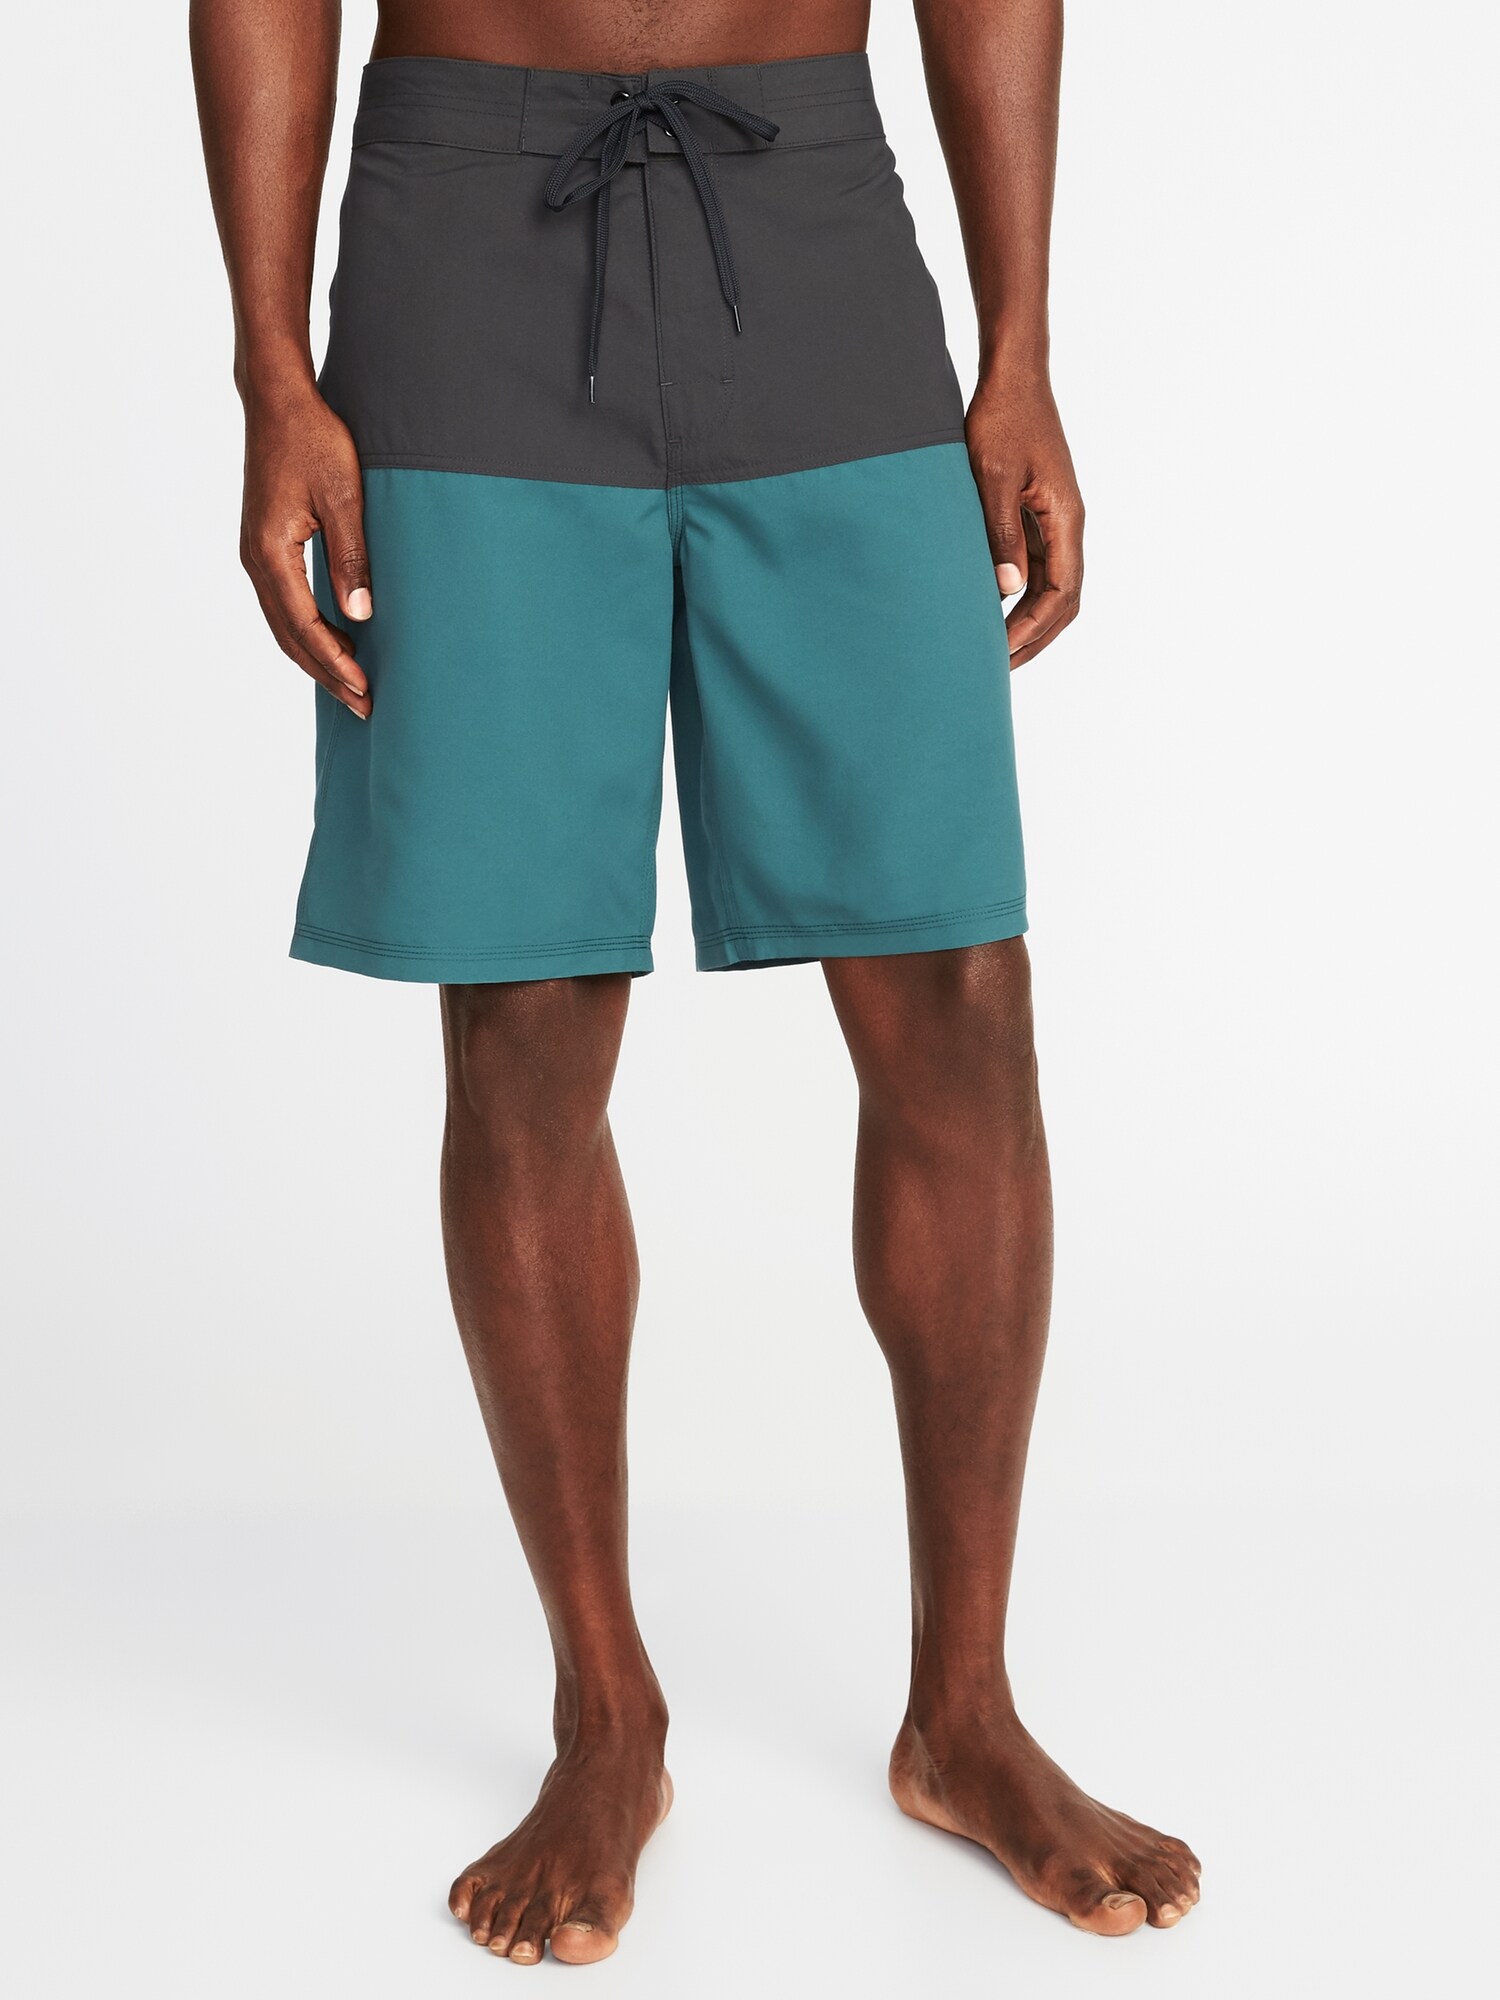 Color-Block Board Shorts for Men - 10-inch inseam | Old Navy